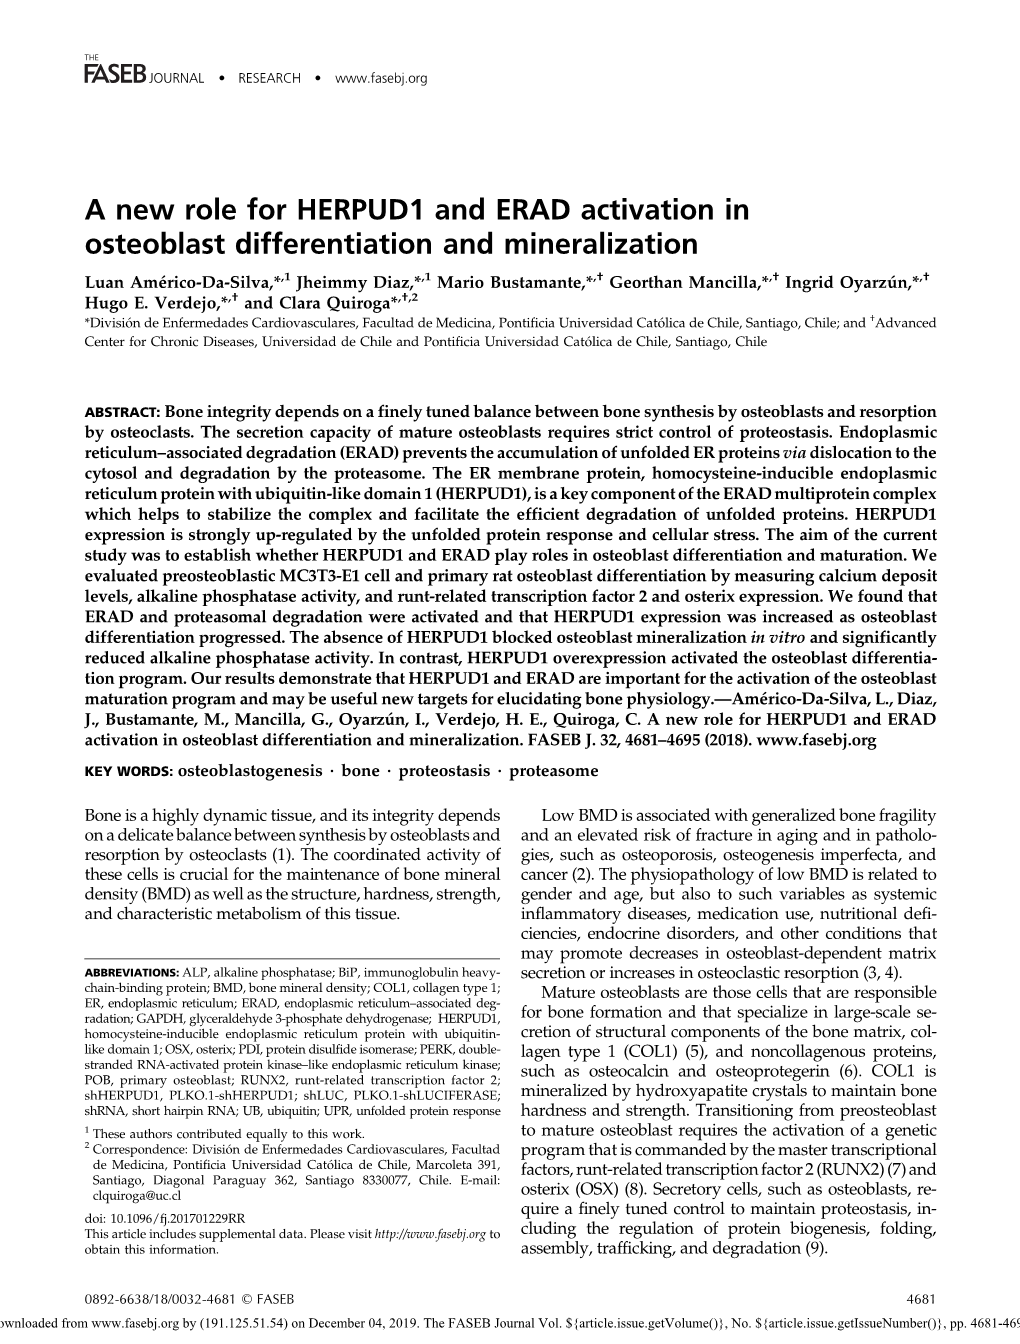 A New Role for HERPUD1 and ERAD Activation in Osteoblast Differentiation and Mineralization